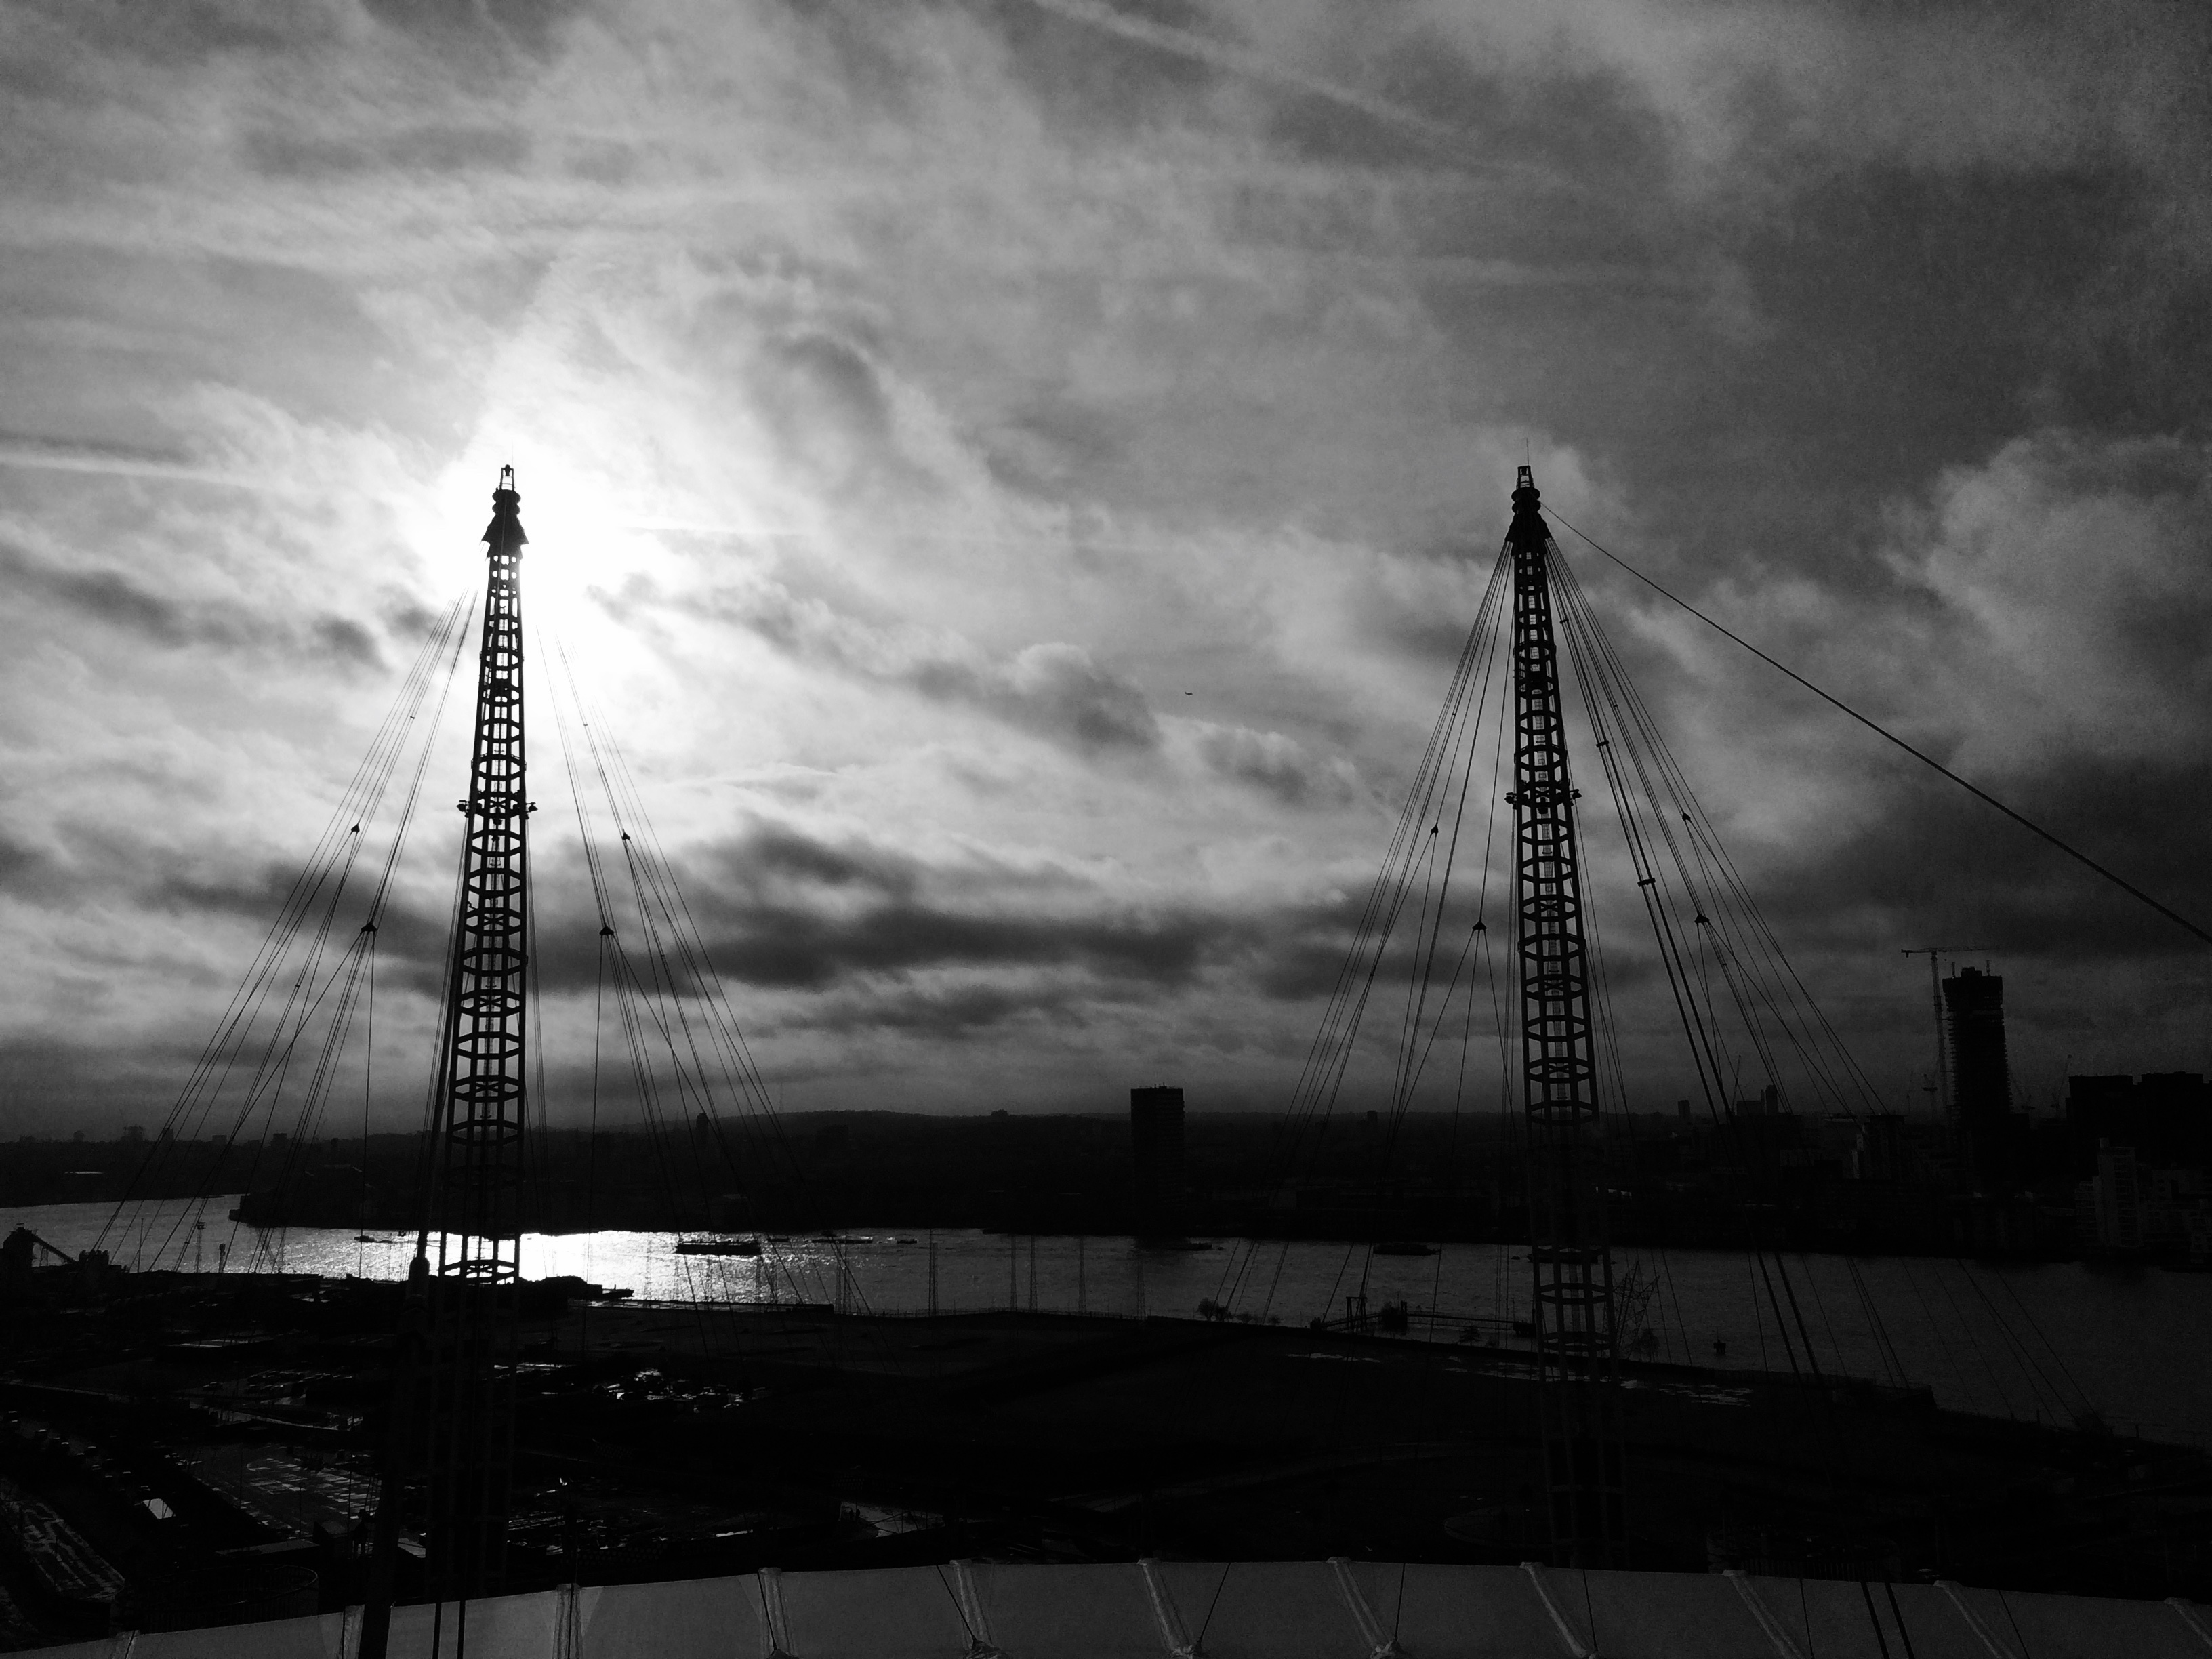 These are 2 of the pylons that support the roof of the O2 Arena, London, UK